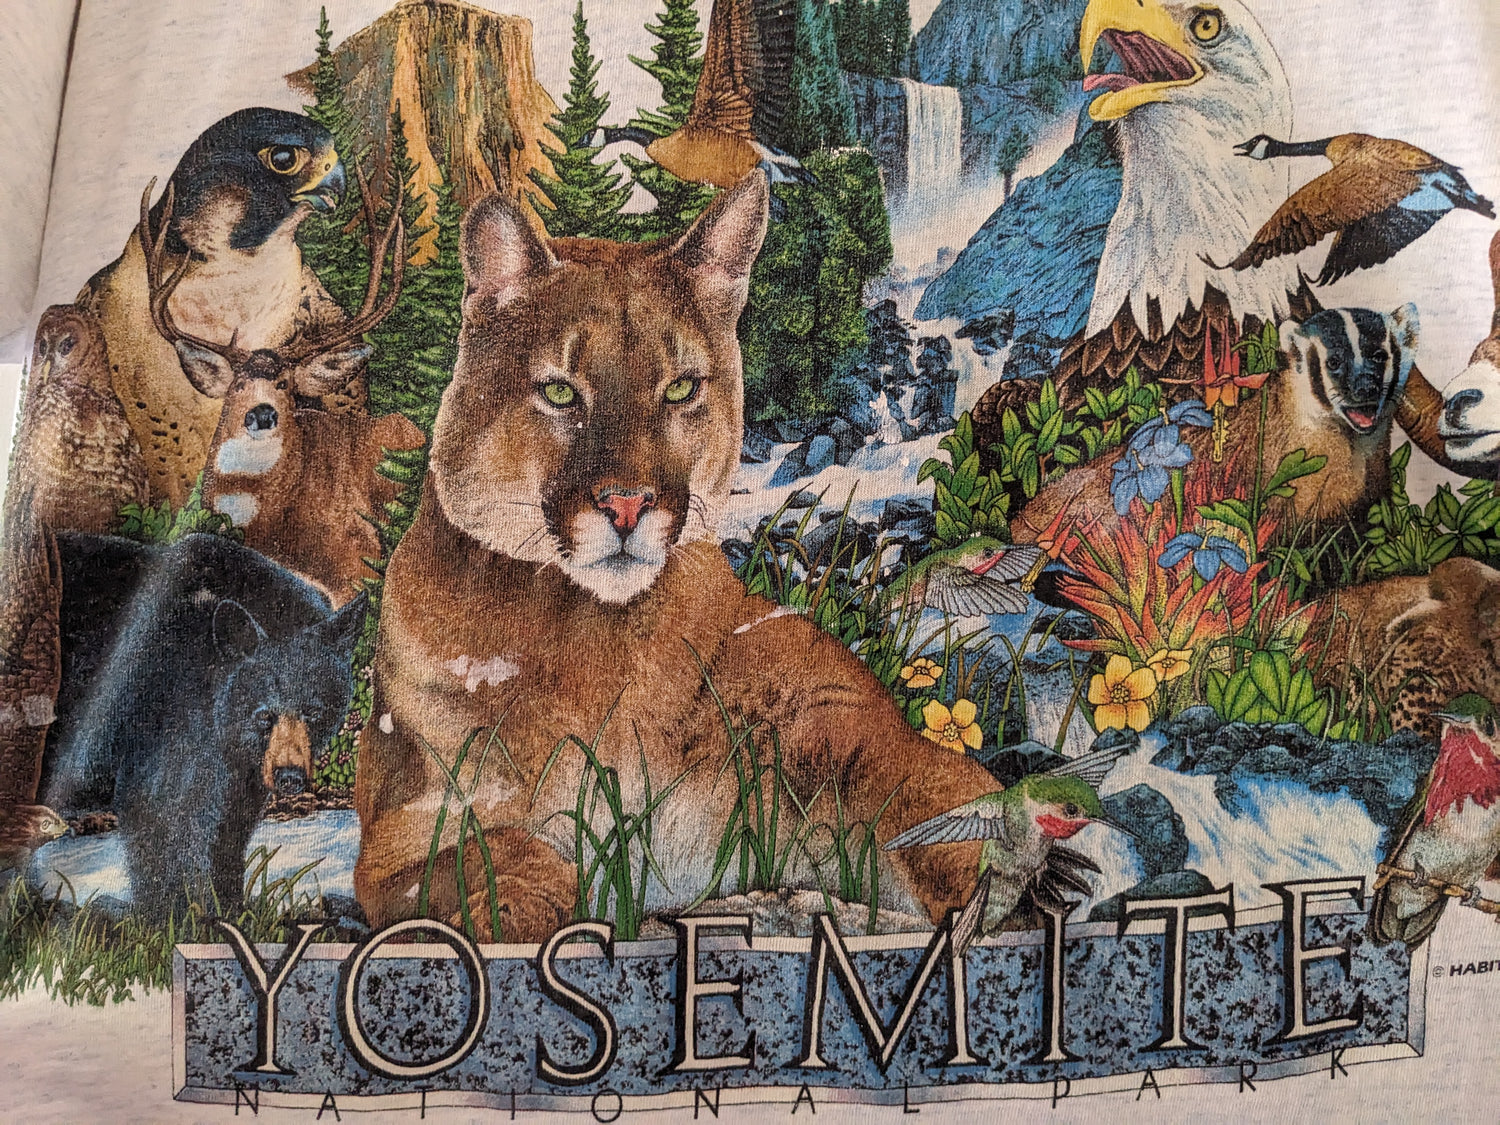 Heather gray Yosemite Habitat shirt with mountain lion, eagle, deer and more animals graphic close-up